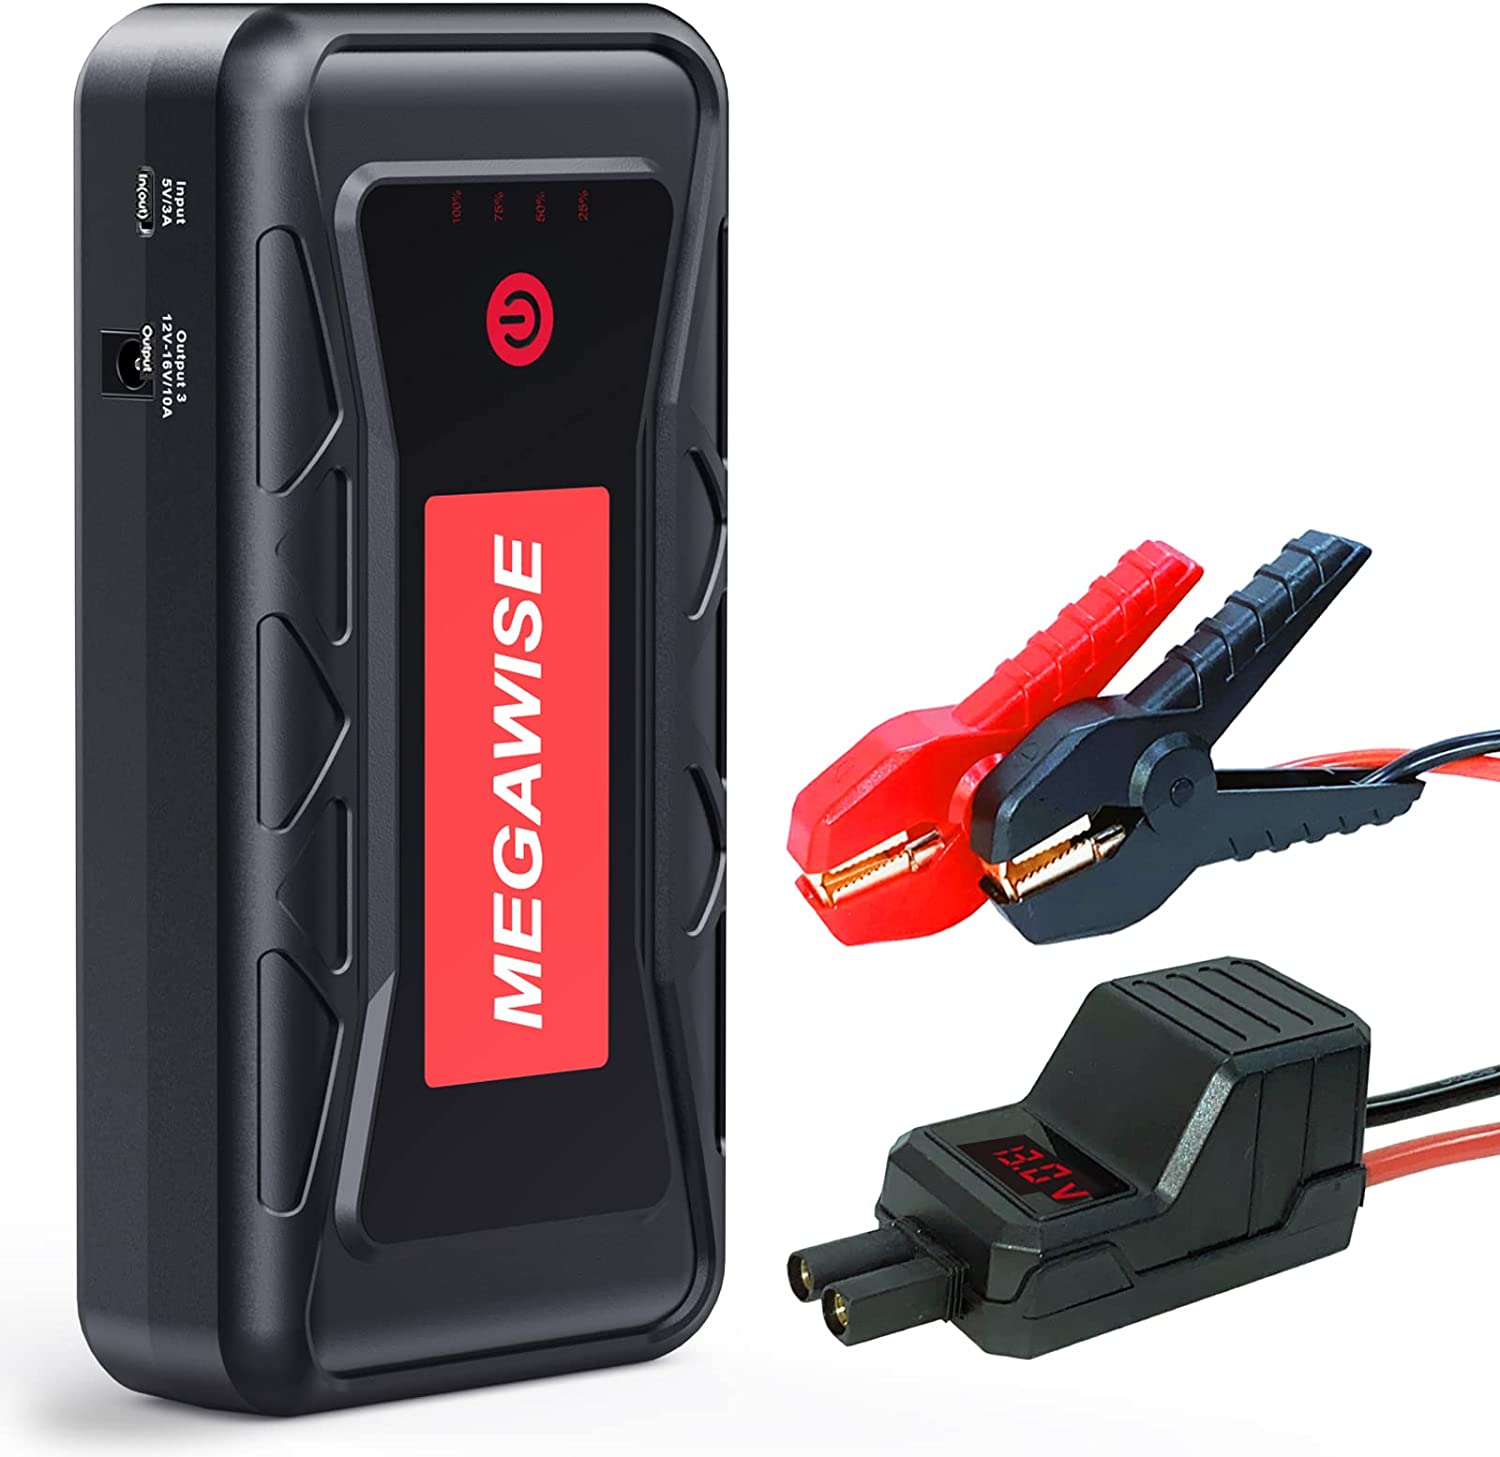 MEGAWISE 2500A Peak 21800mAh Car Battery Jump Starter (up to 8.0L Gas/ –  Megawise